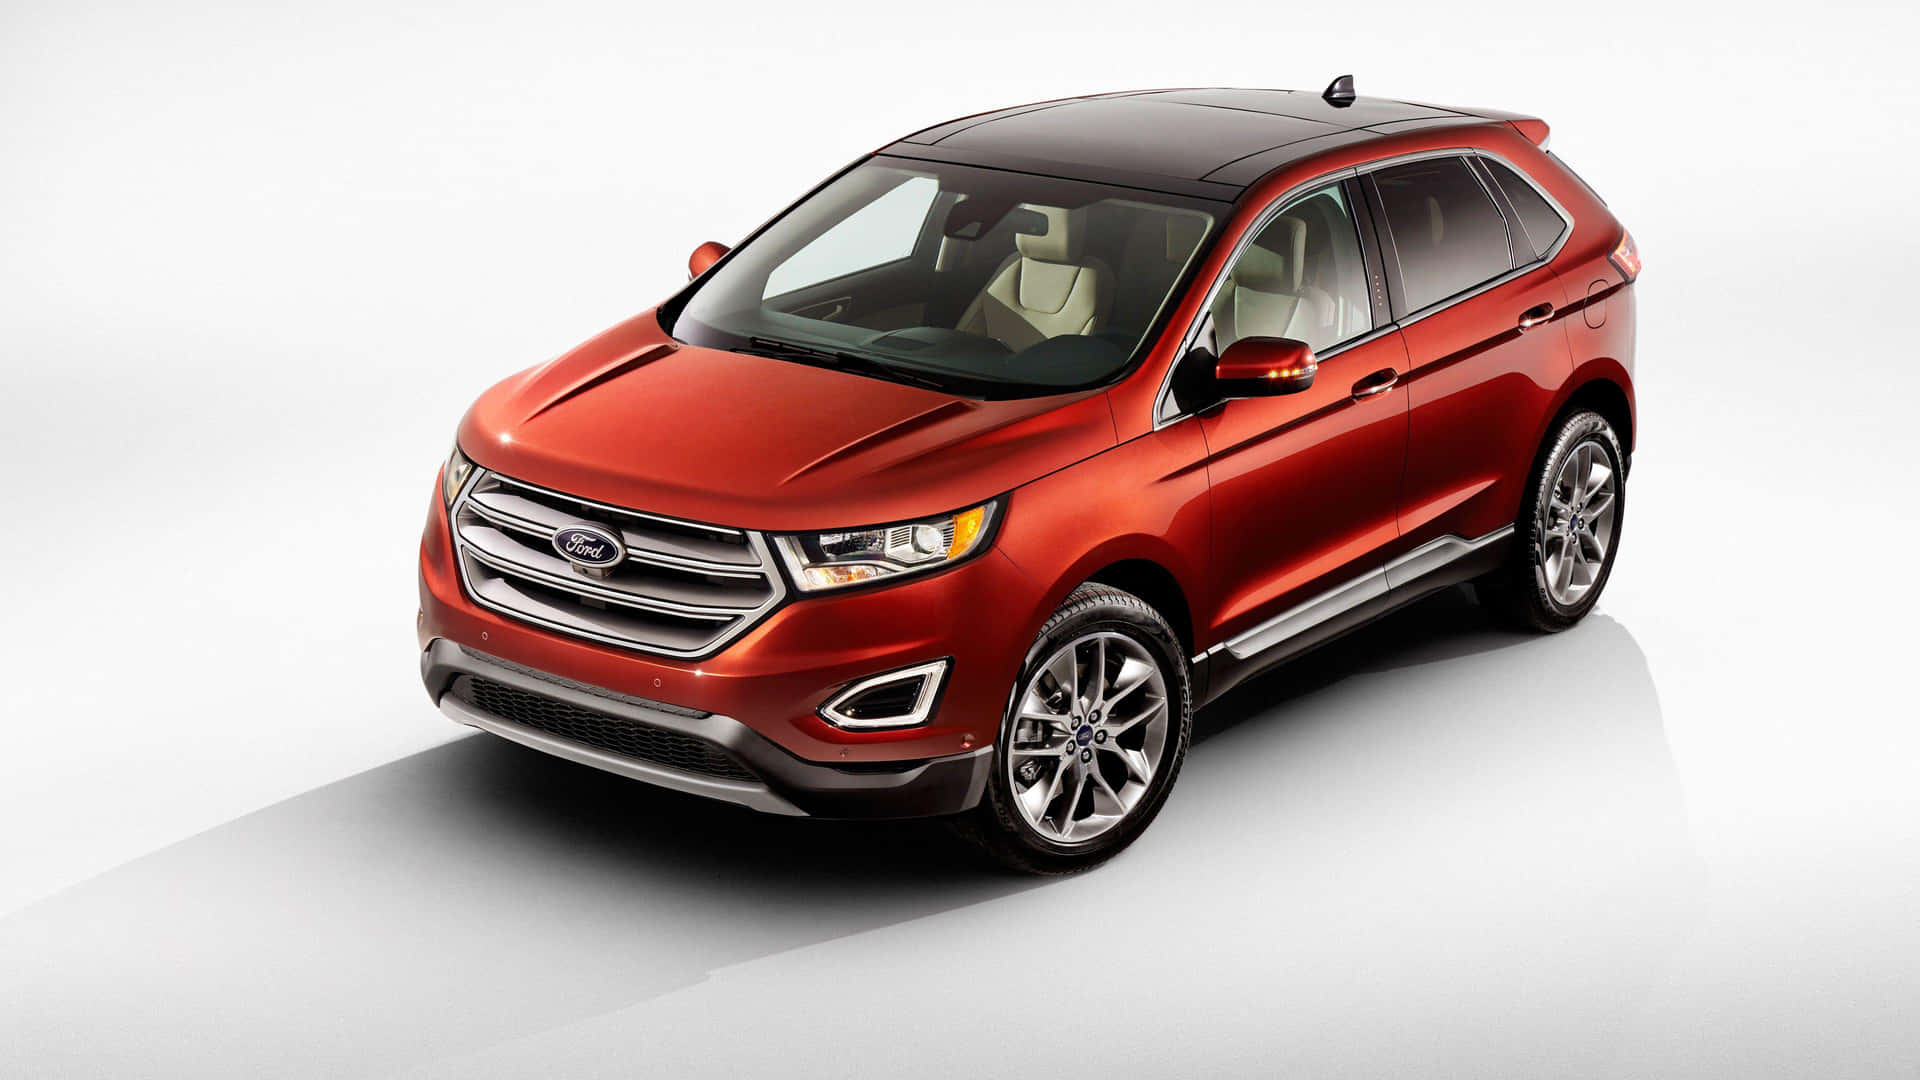 Sleek and Powerful Ford Edge in Action Wallpaper